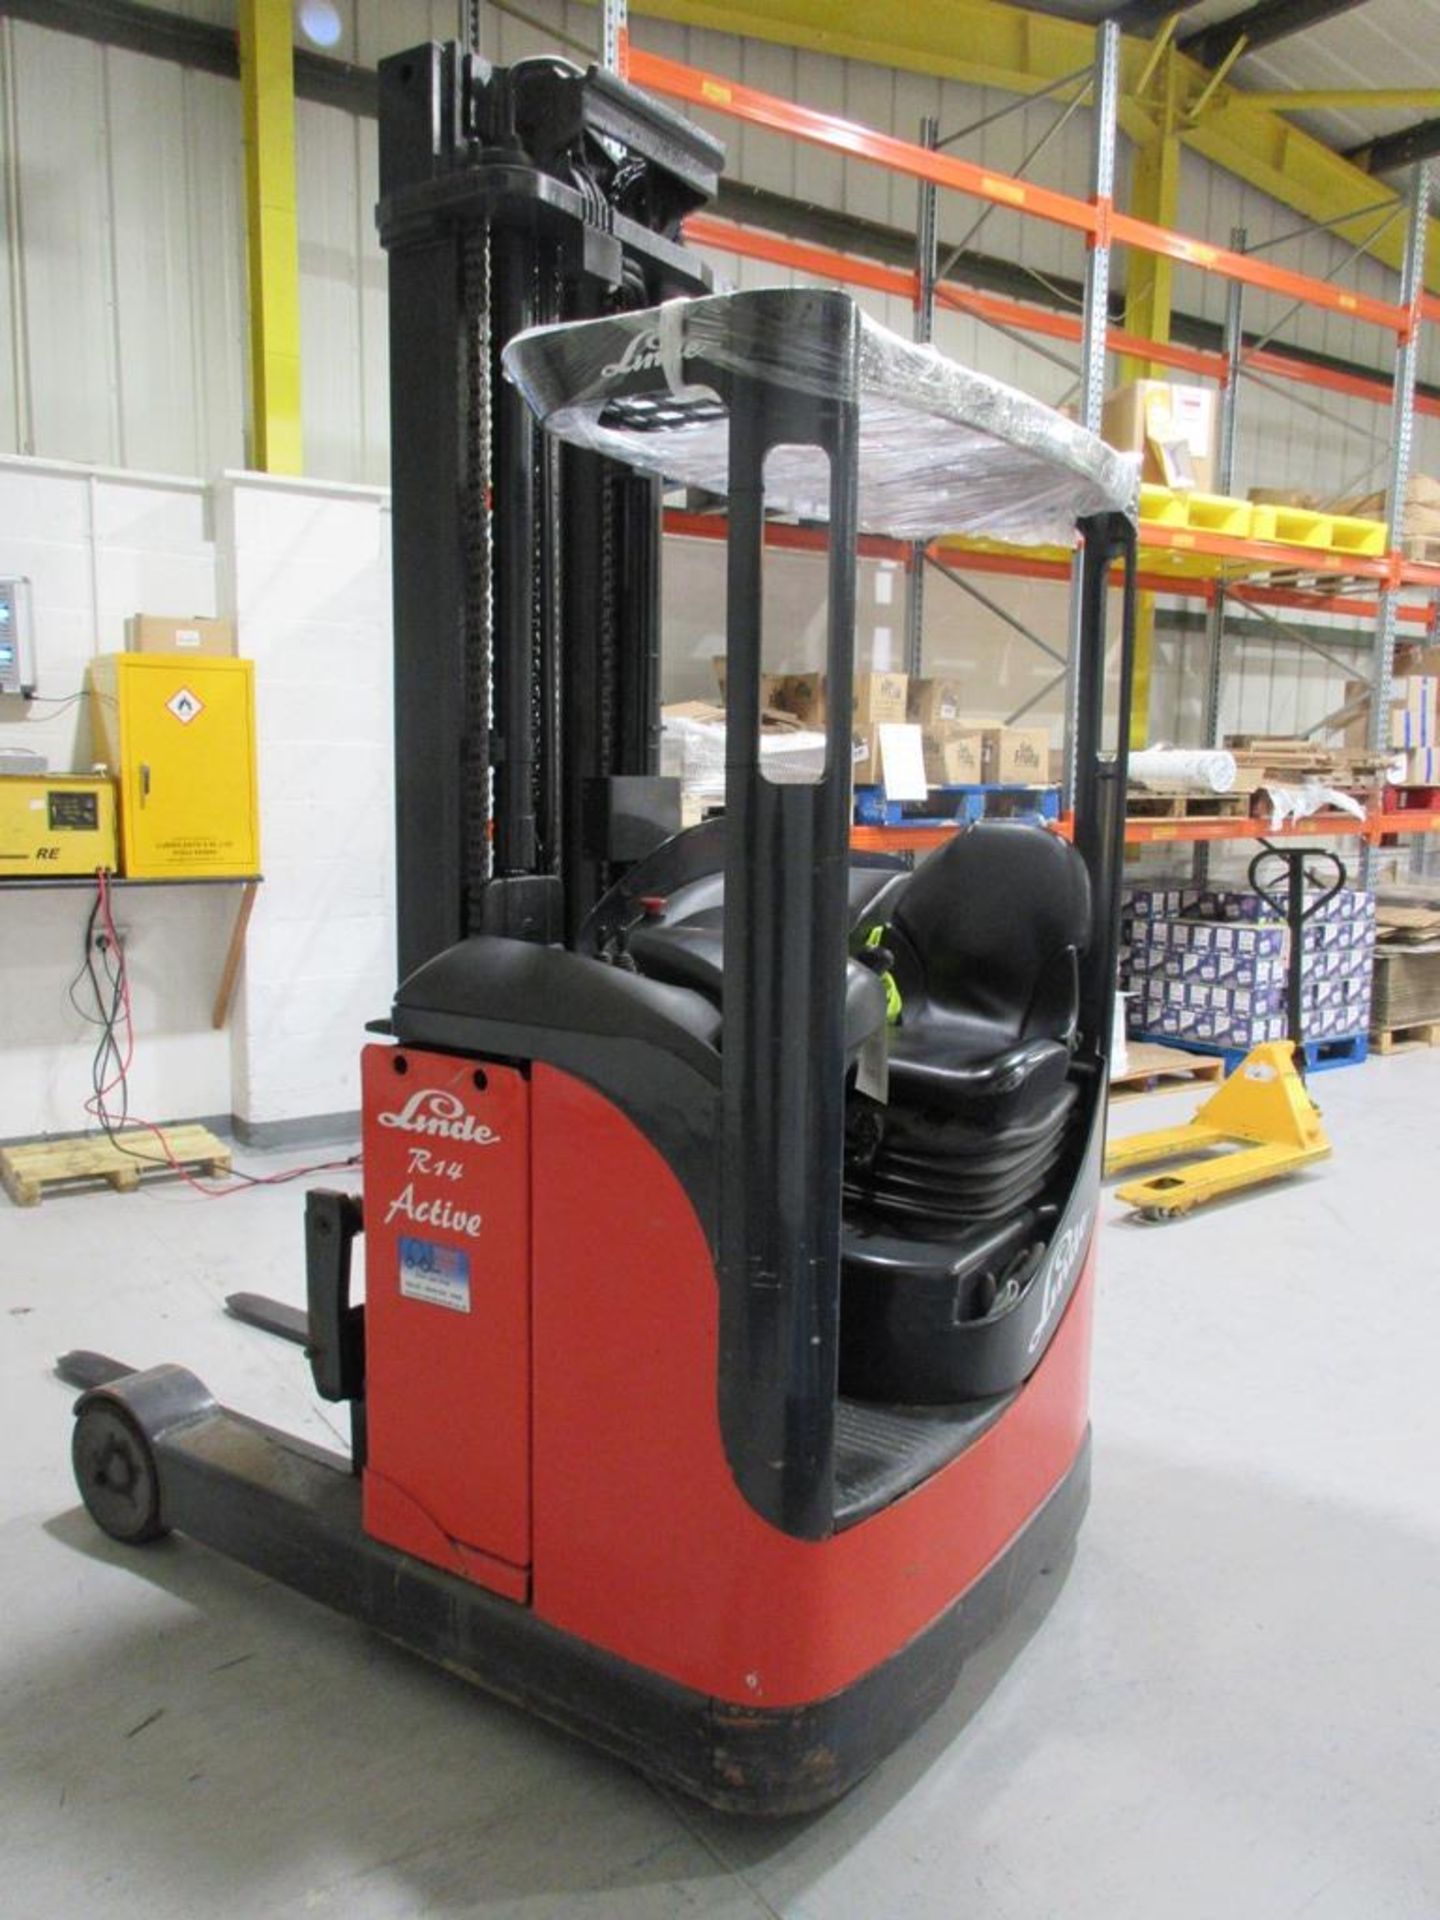 Linde R14 Active ride on, battery operated t/m reach forklift truck, capacity 1400kgs, run hours: - Image 10 of 11